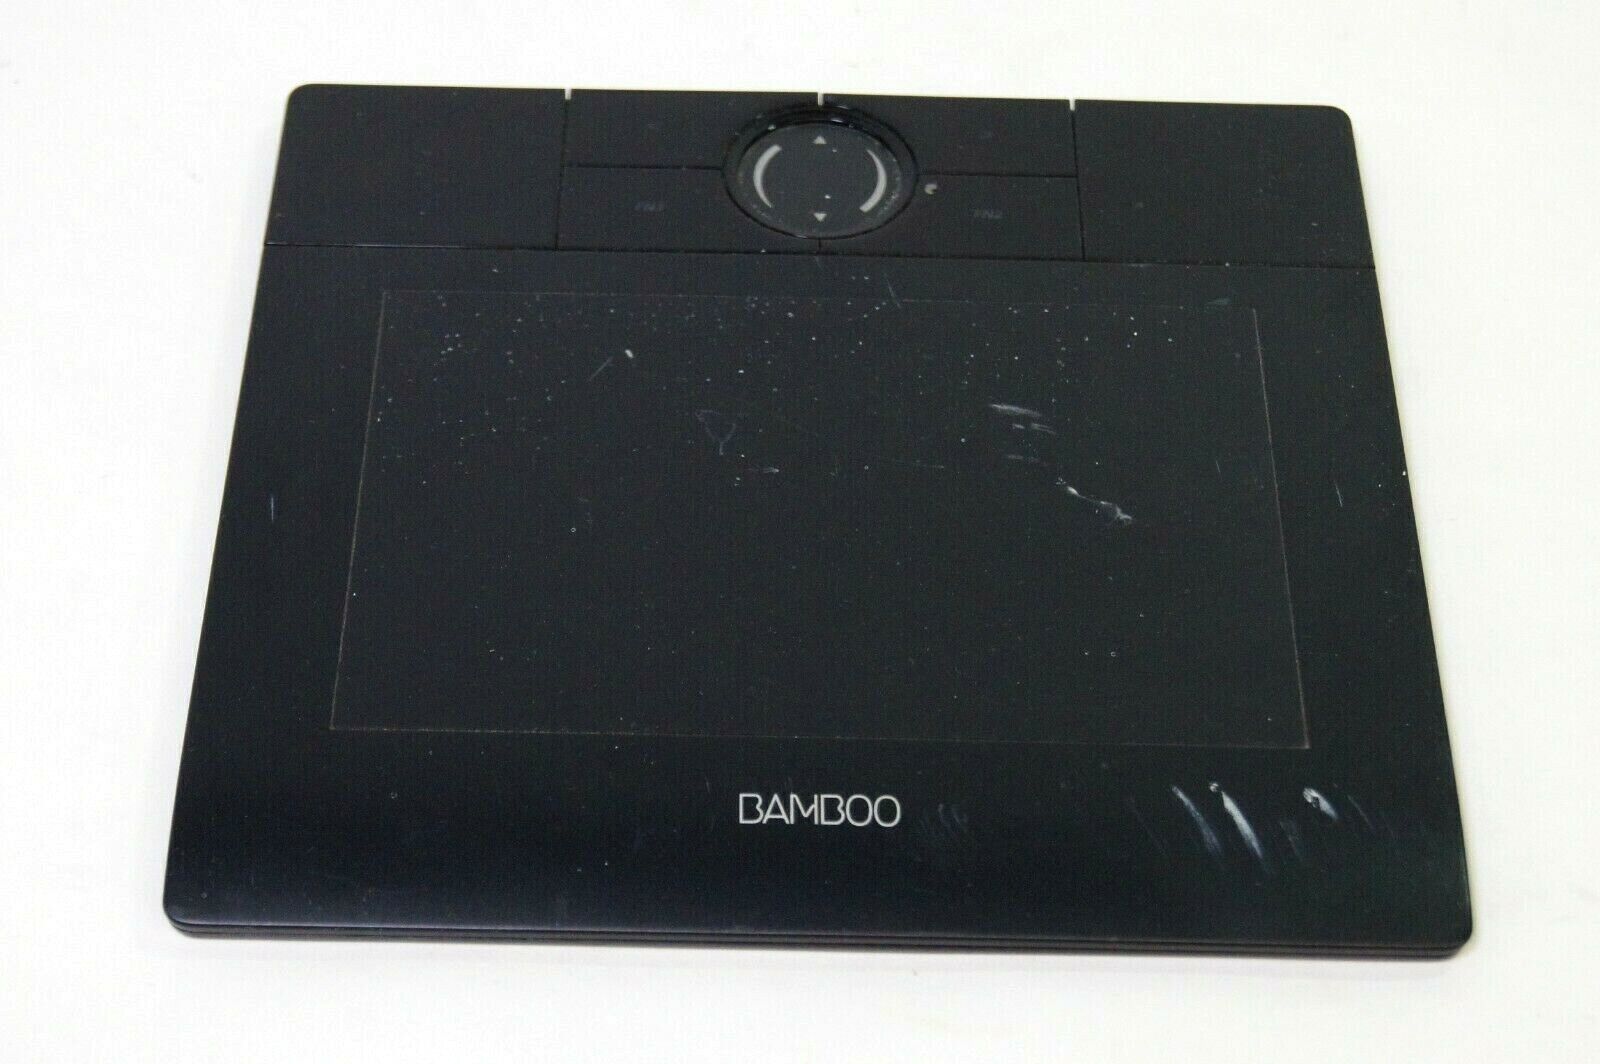 Wacom Bamboo MTE-450 Drawing Graphics Tablet - Tested